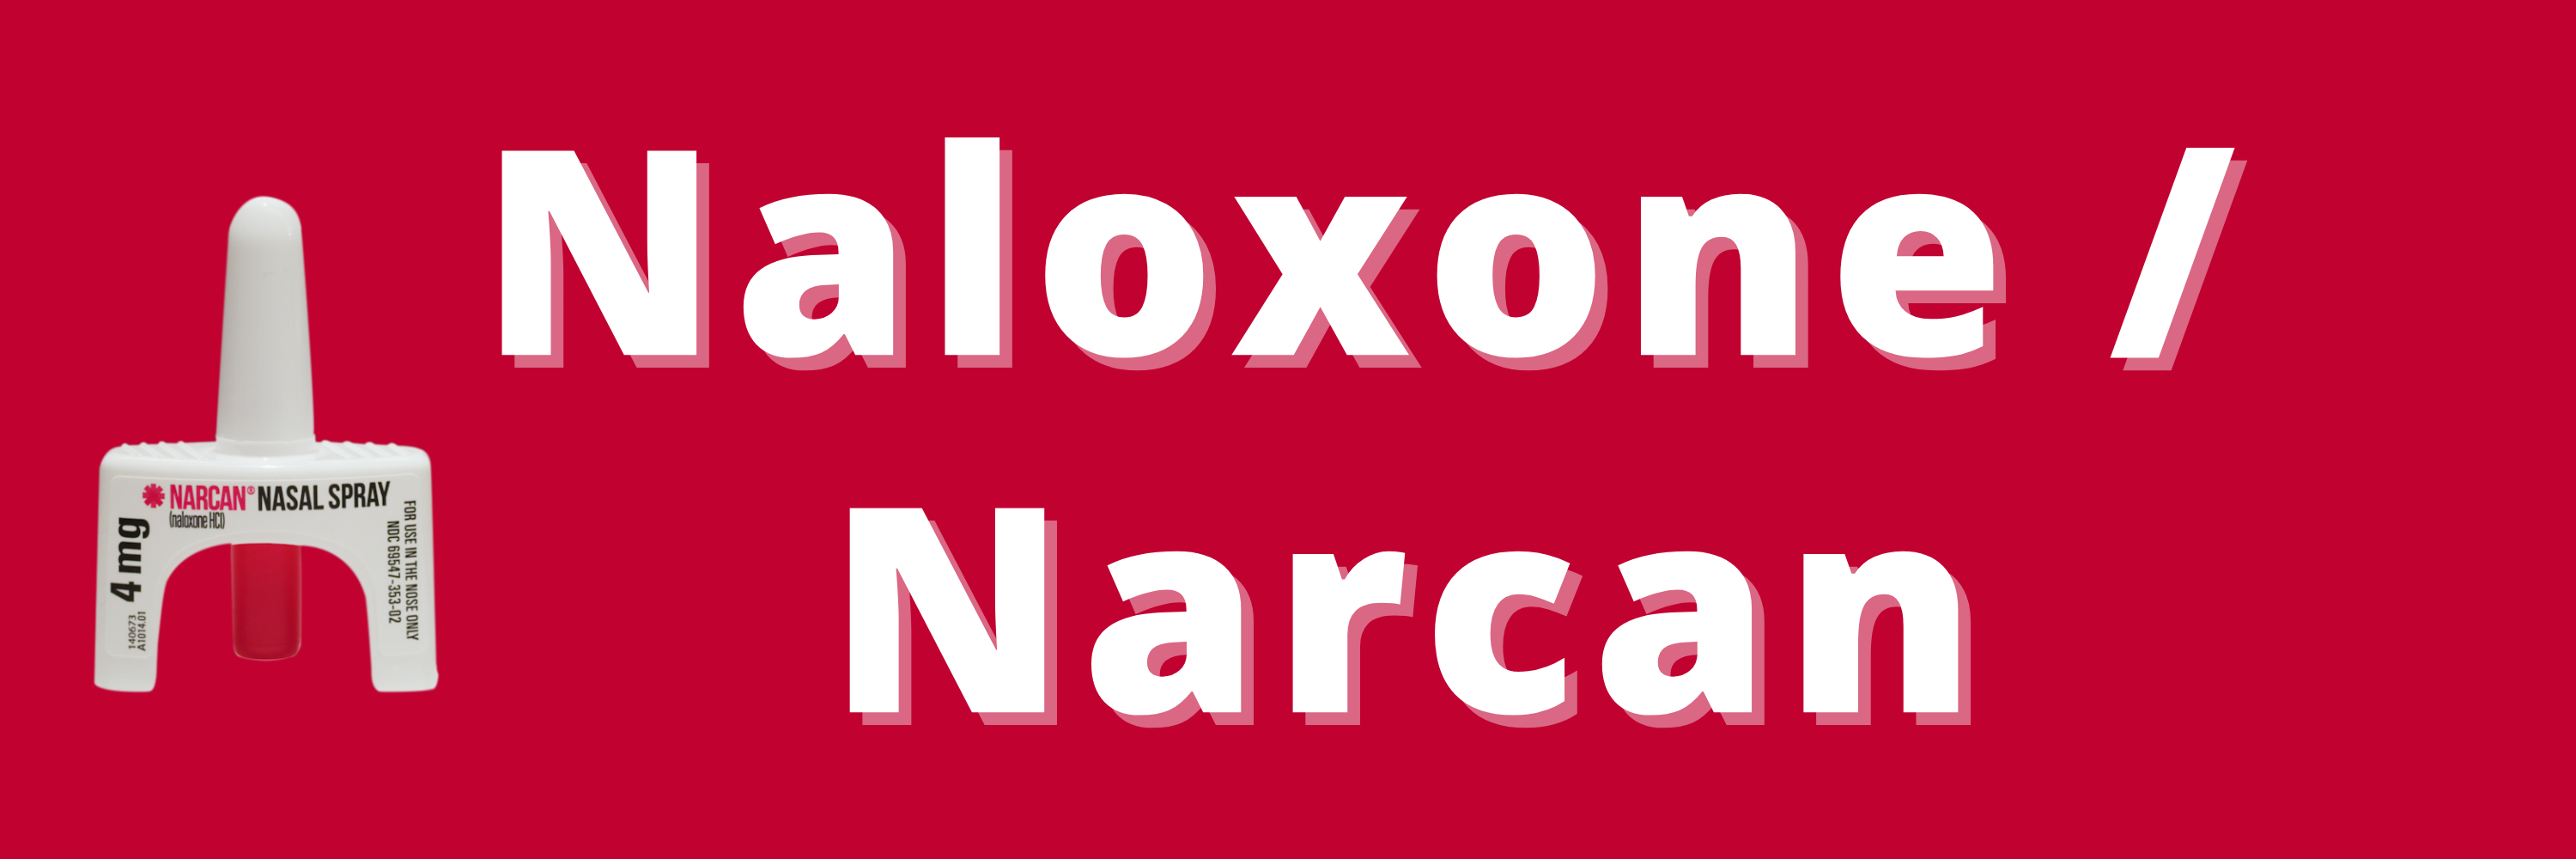 Photo of Narcan with text "Naloxone / Narcan"